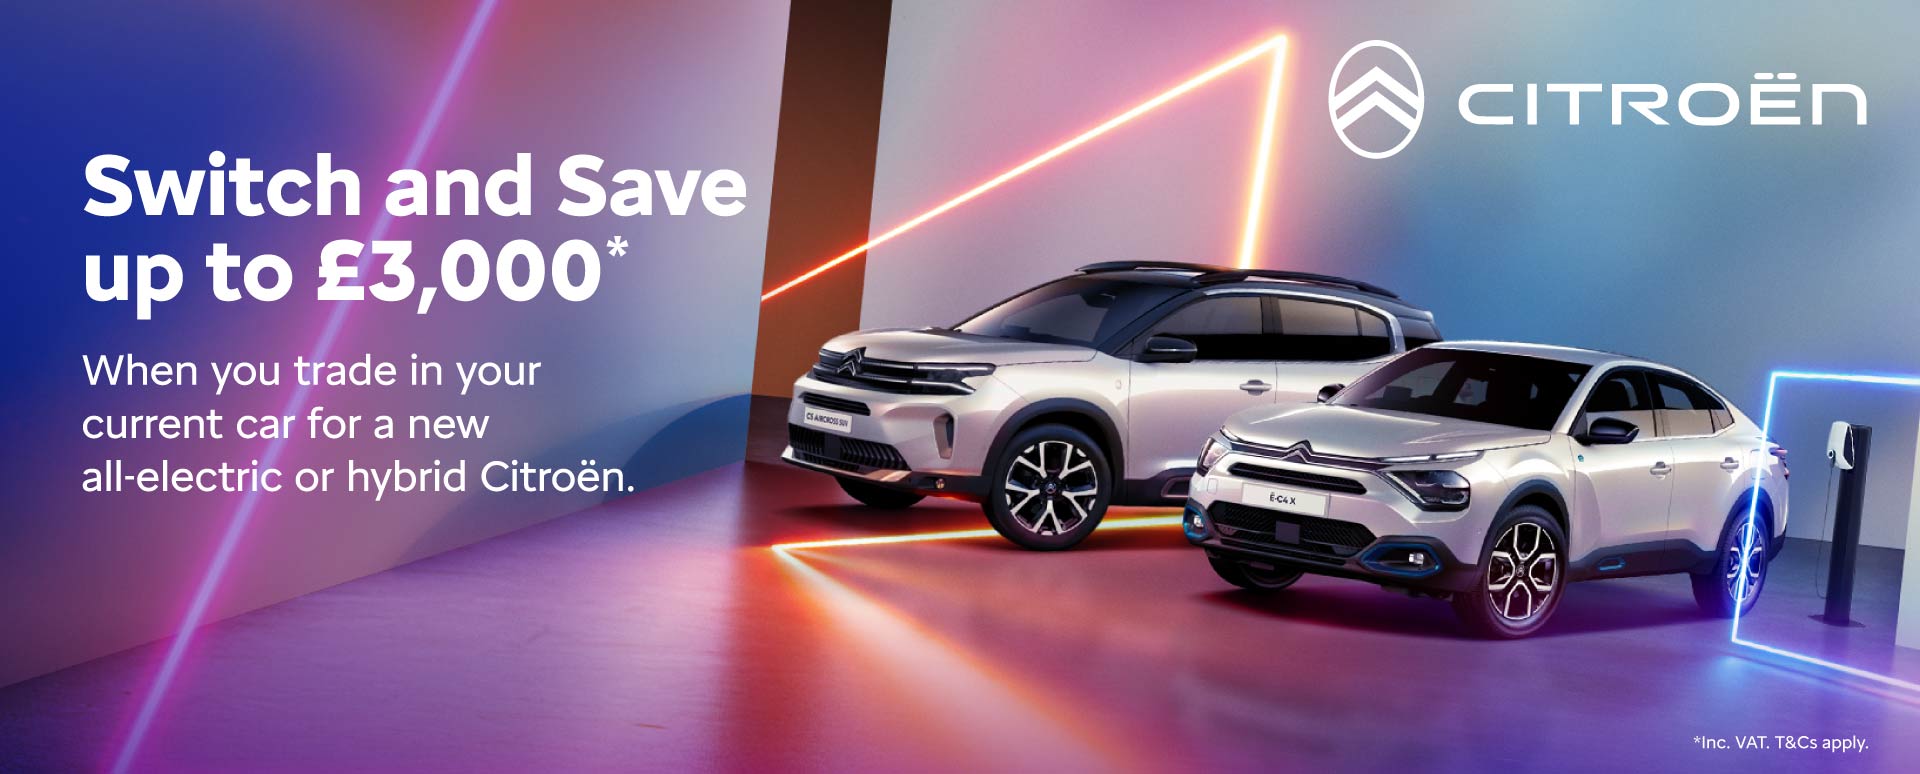 Citroën Switch and Save Campaign